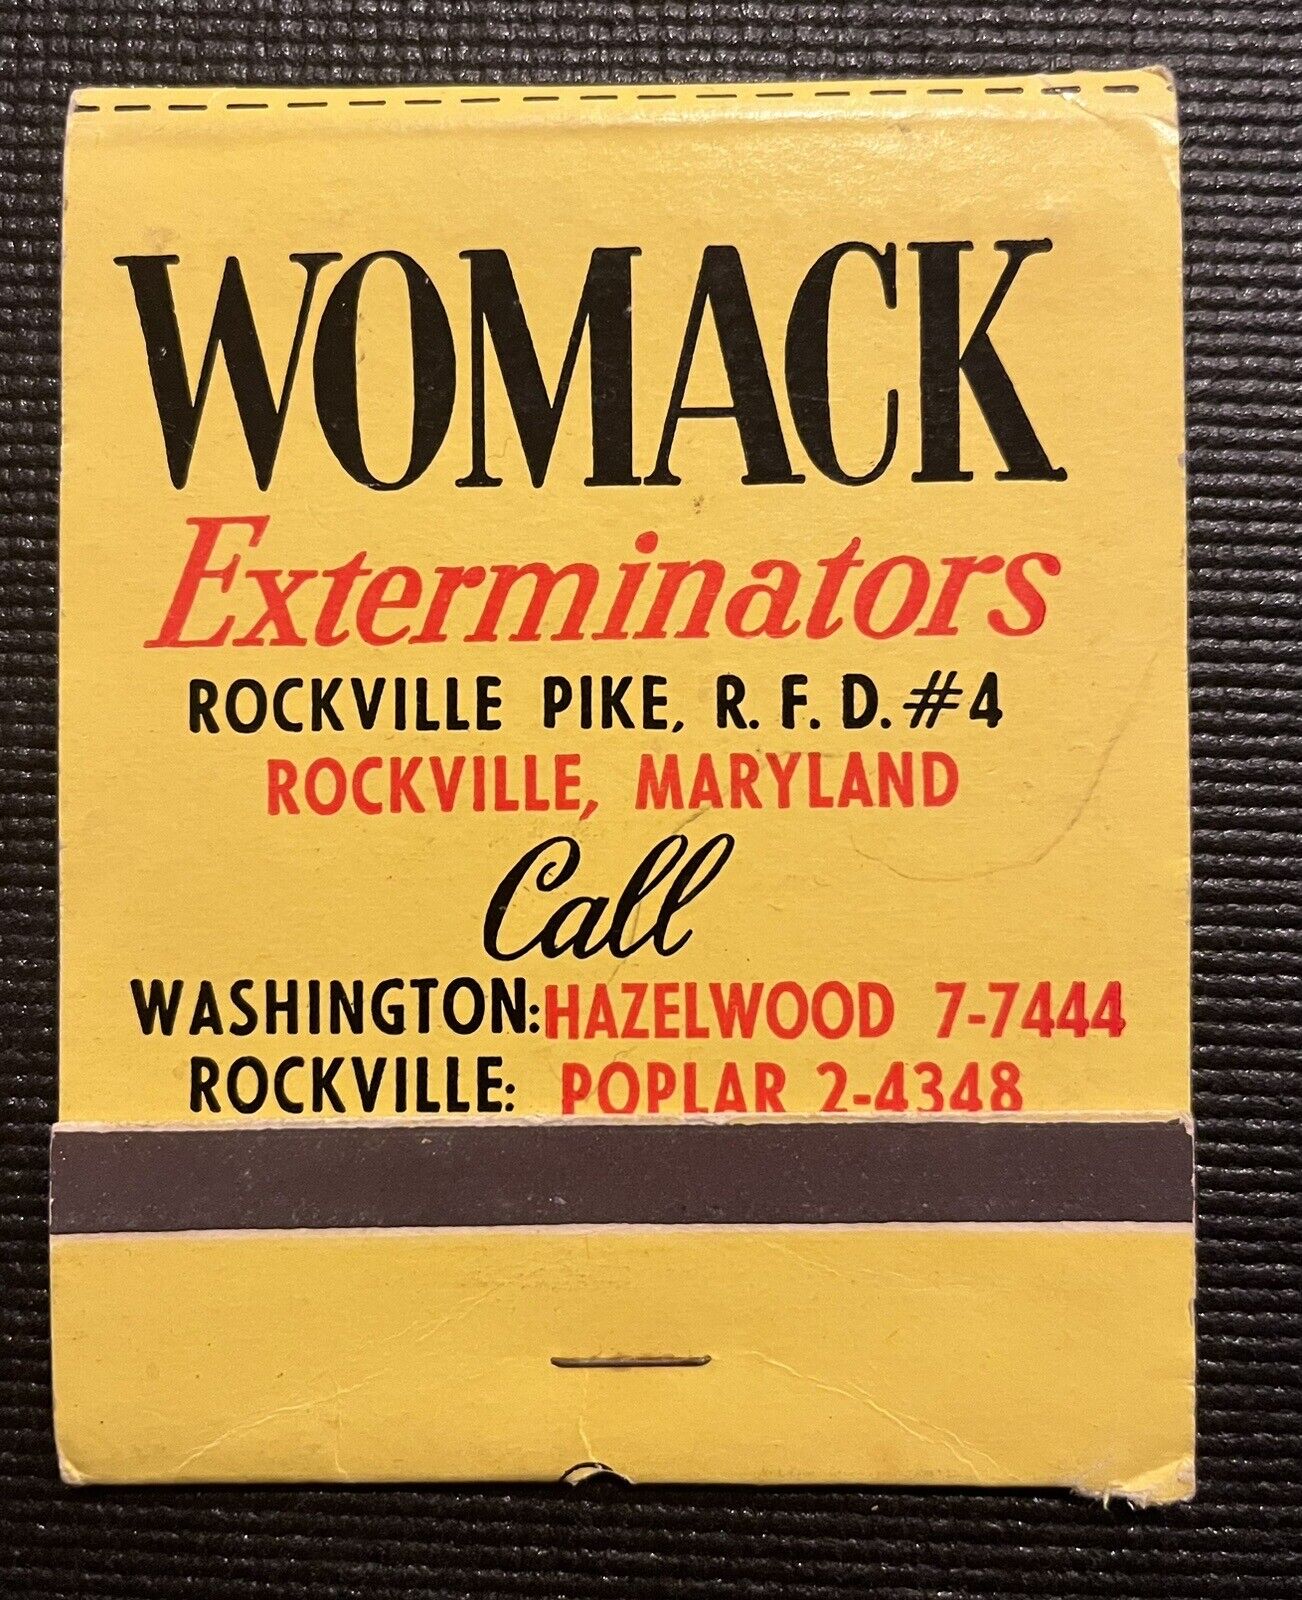 Vintage Matchbook: “Womack Exterminators” With Features With Matches